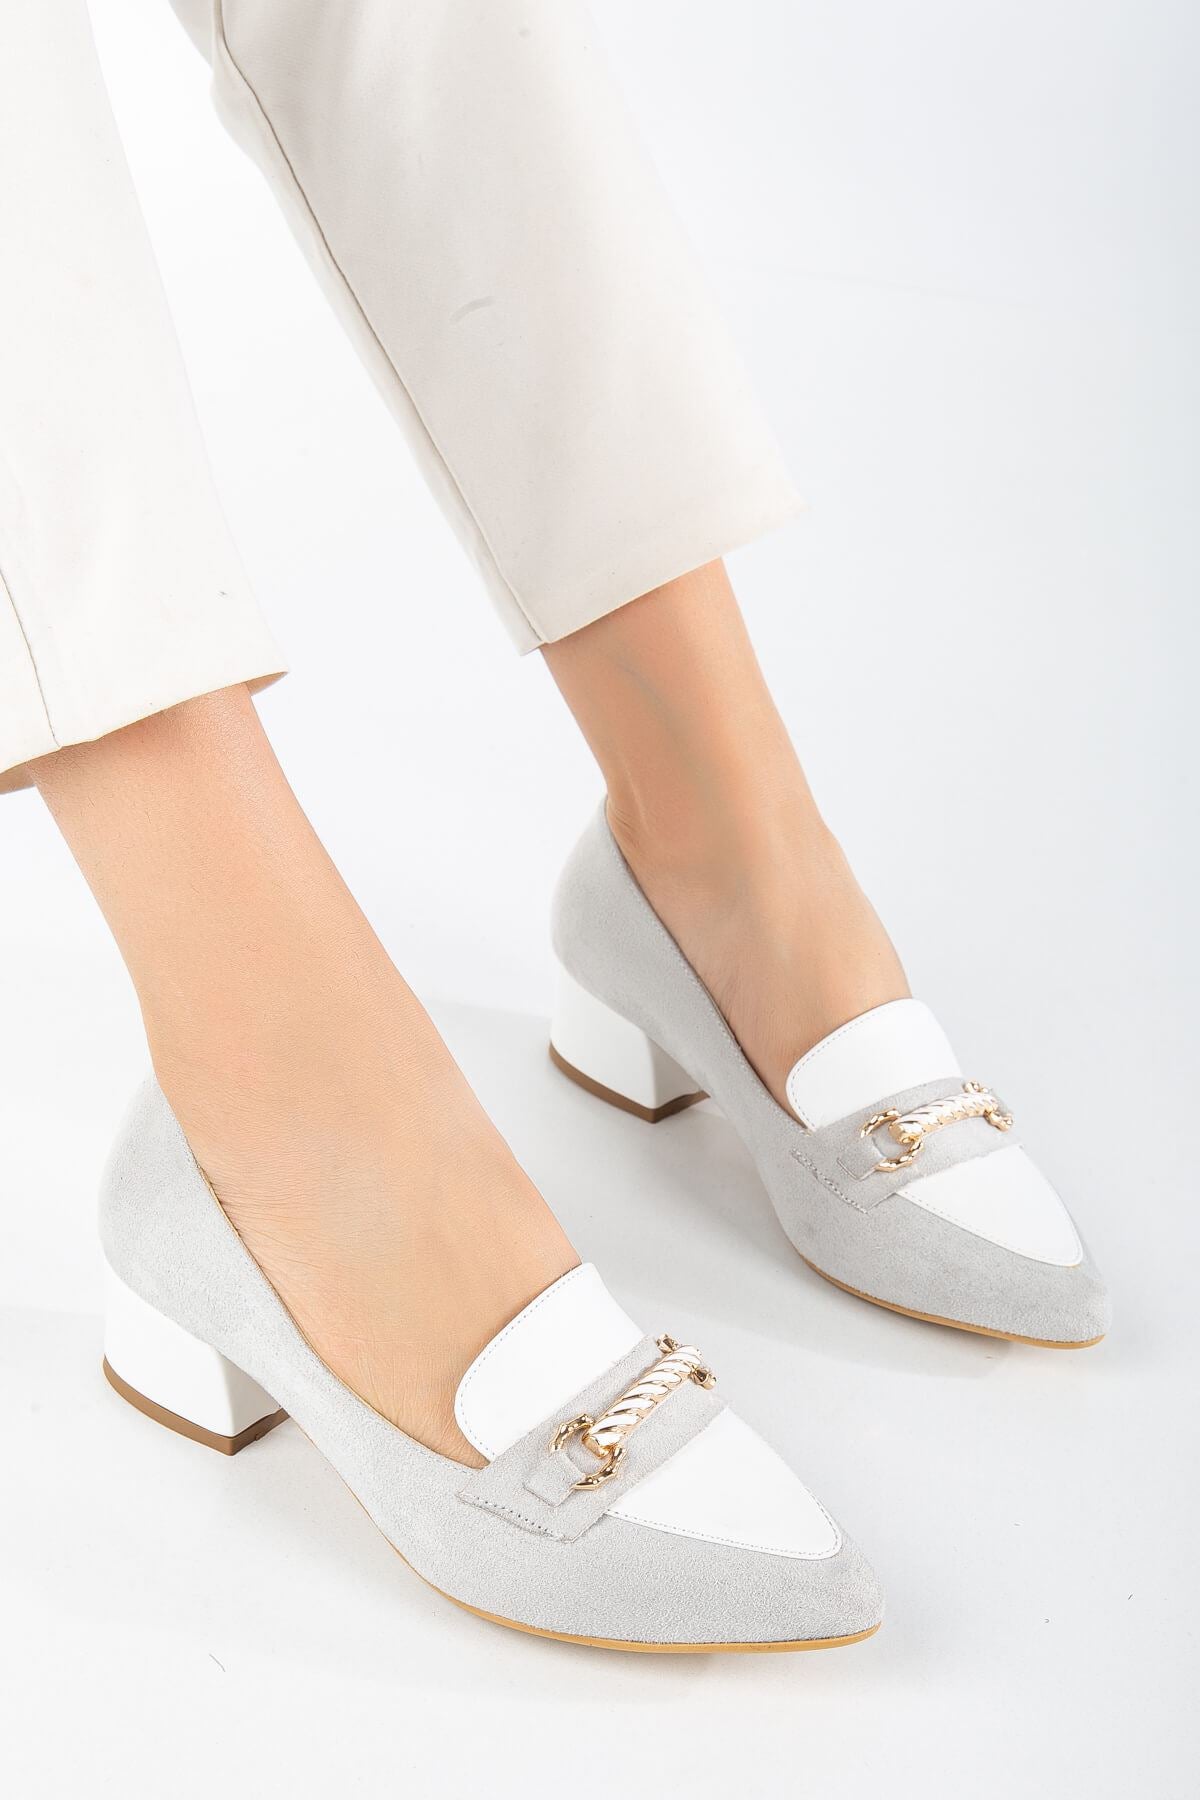 Women's Low Heeled Shoes White Suede with Skin Buckle Detail - STREETMODE™